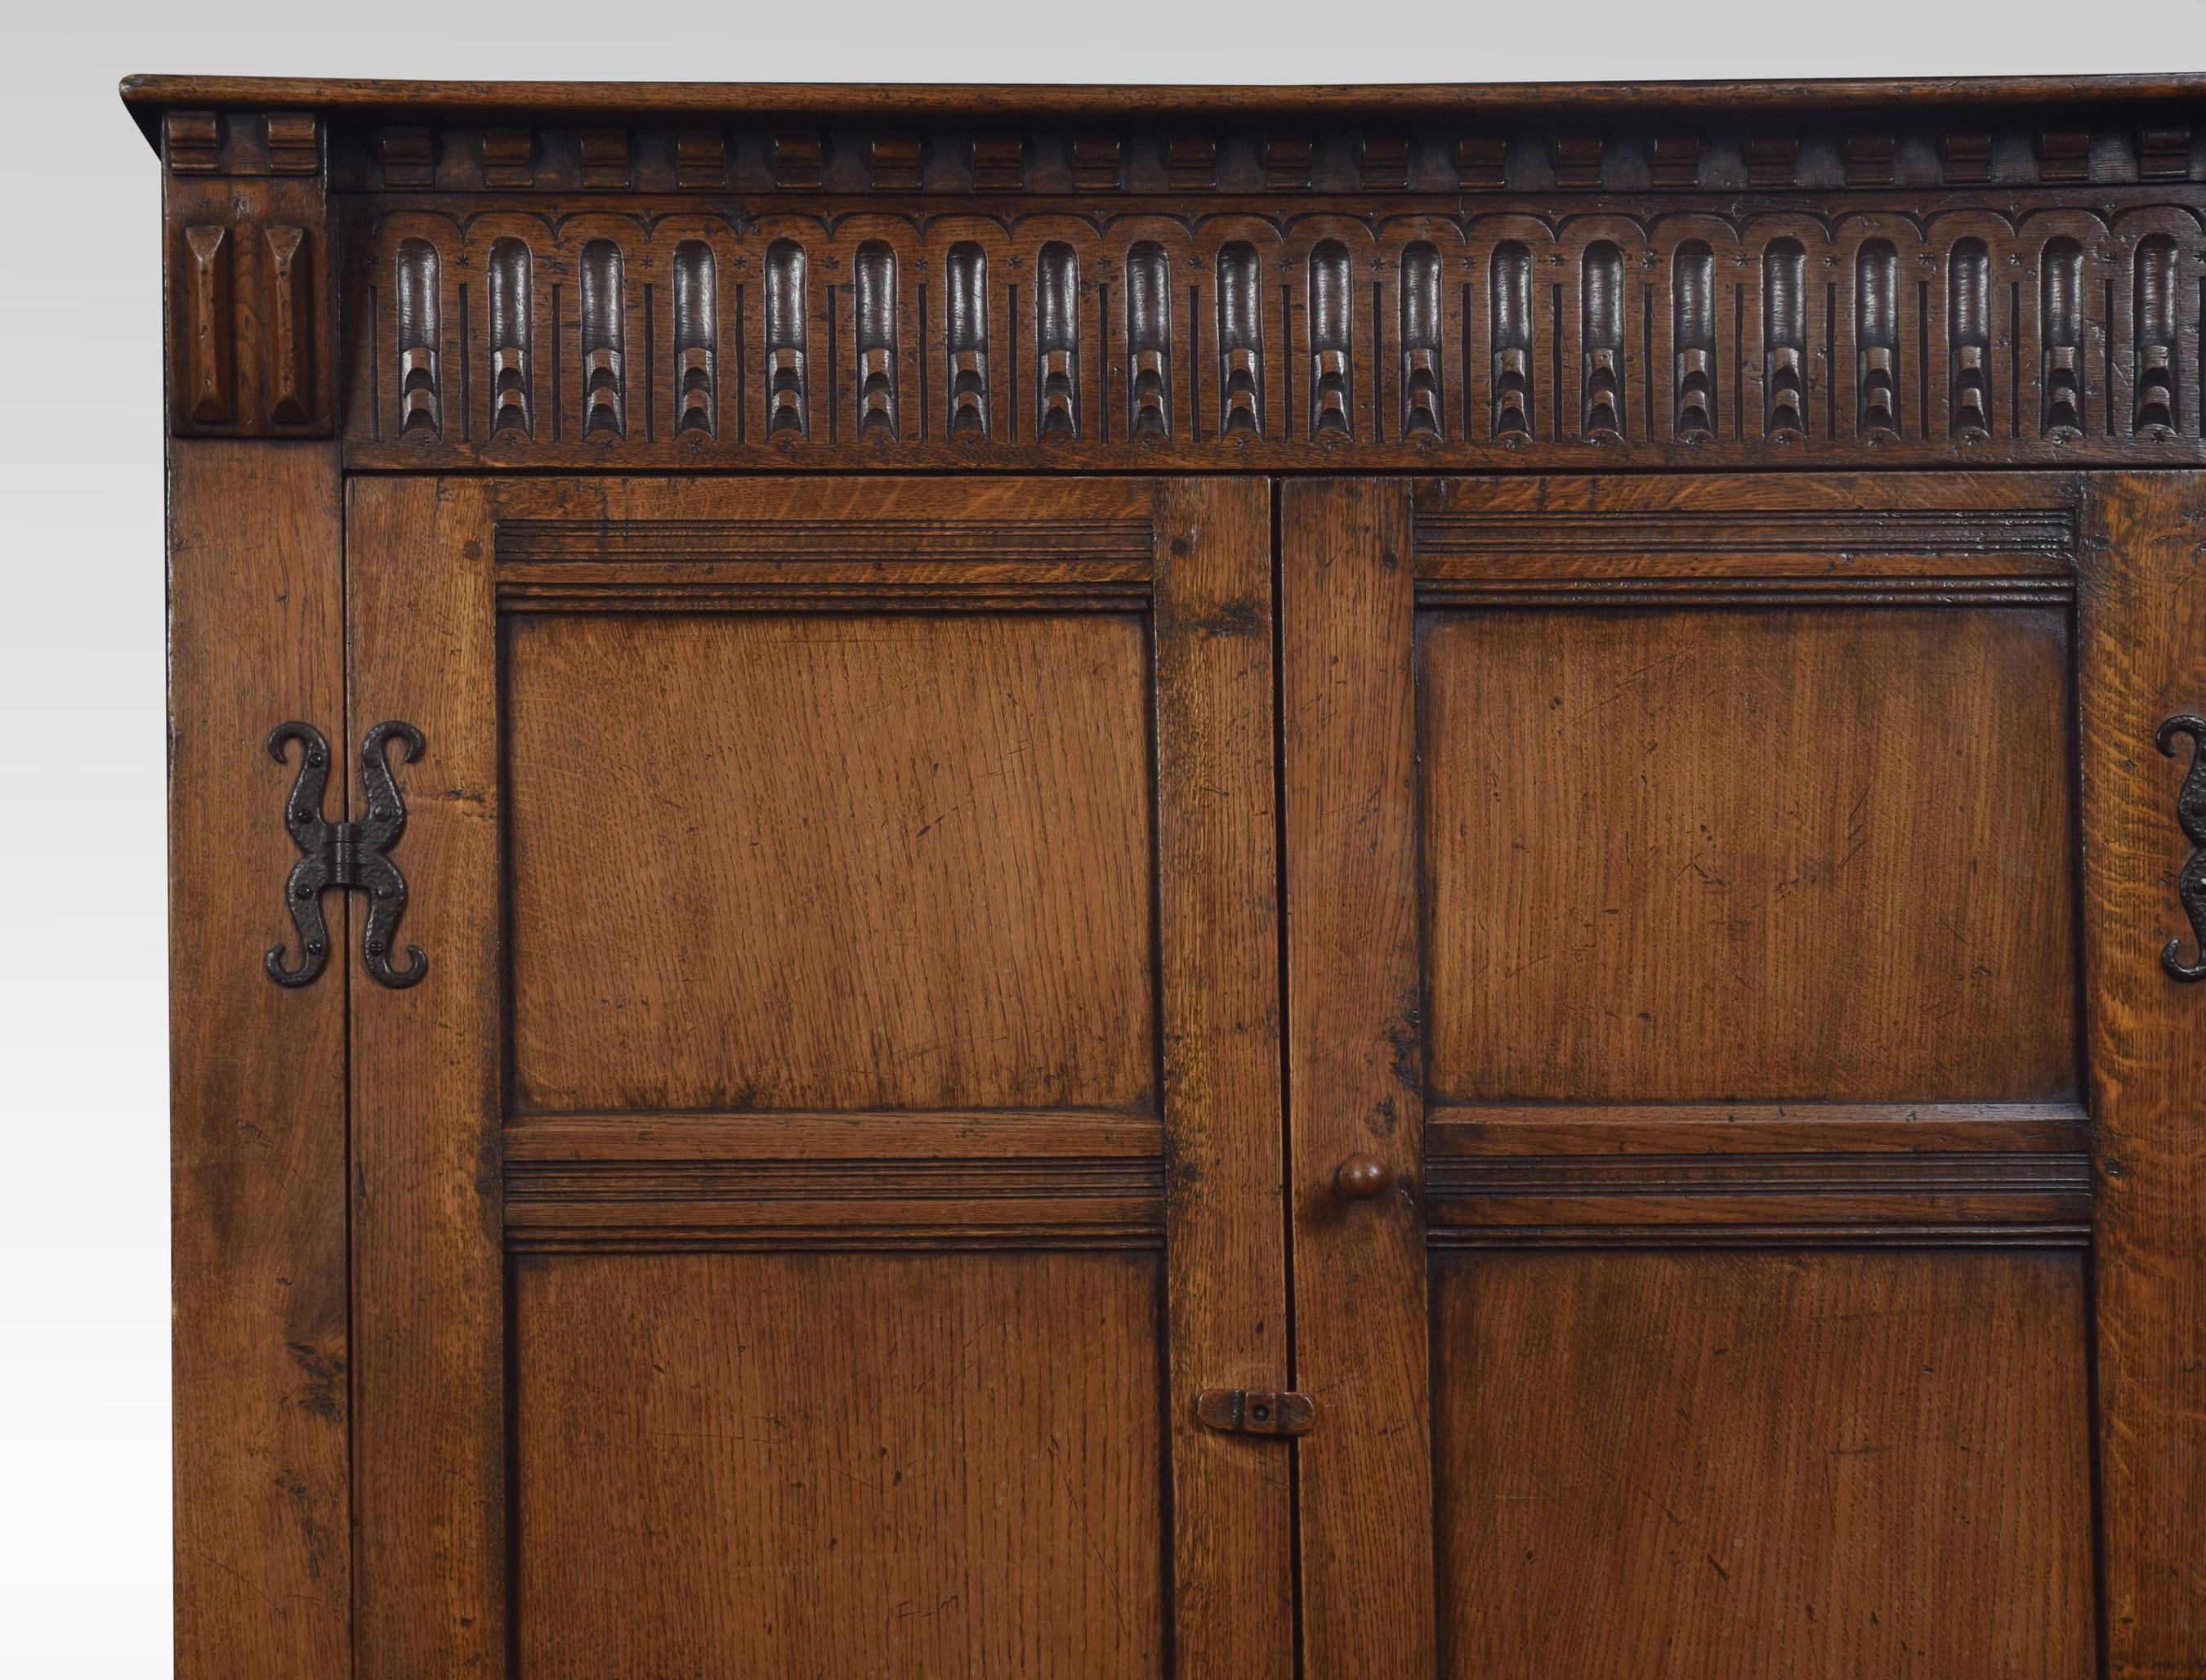 Solid oak two-door wardrobe, the molded cornice above carved decoration in the Jacobean style. The large paneled doors opening to reveal a hanging area. All raised up on bracket feet.
Dimensions:
Height 73 inches
Length 48 inches
Width 21 inches.